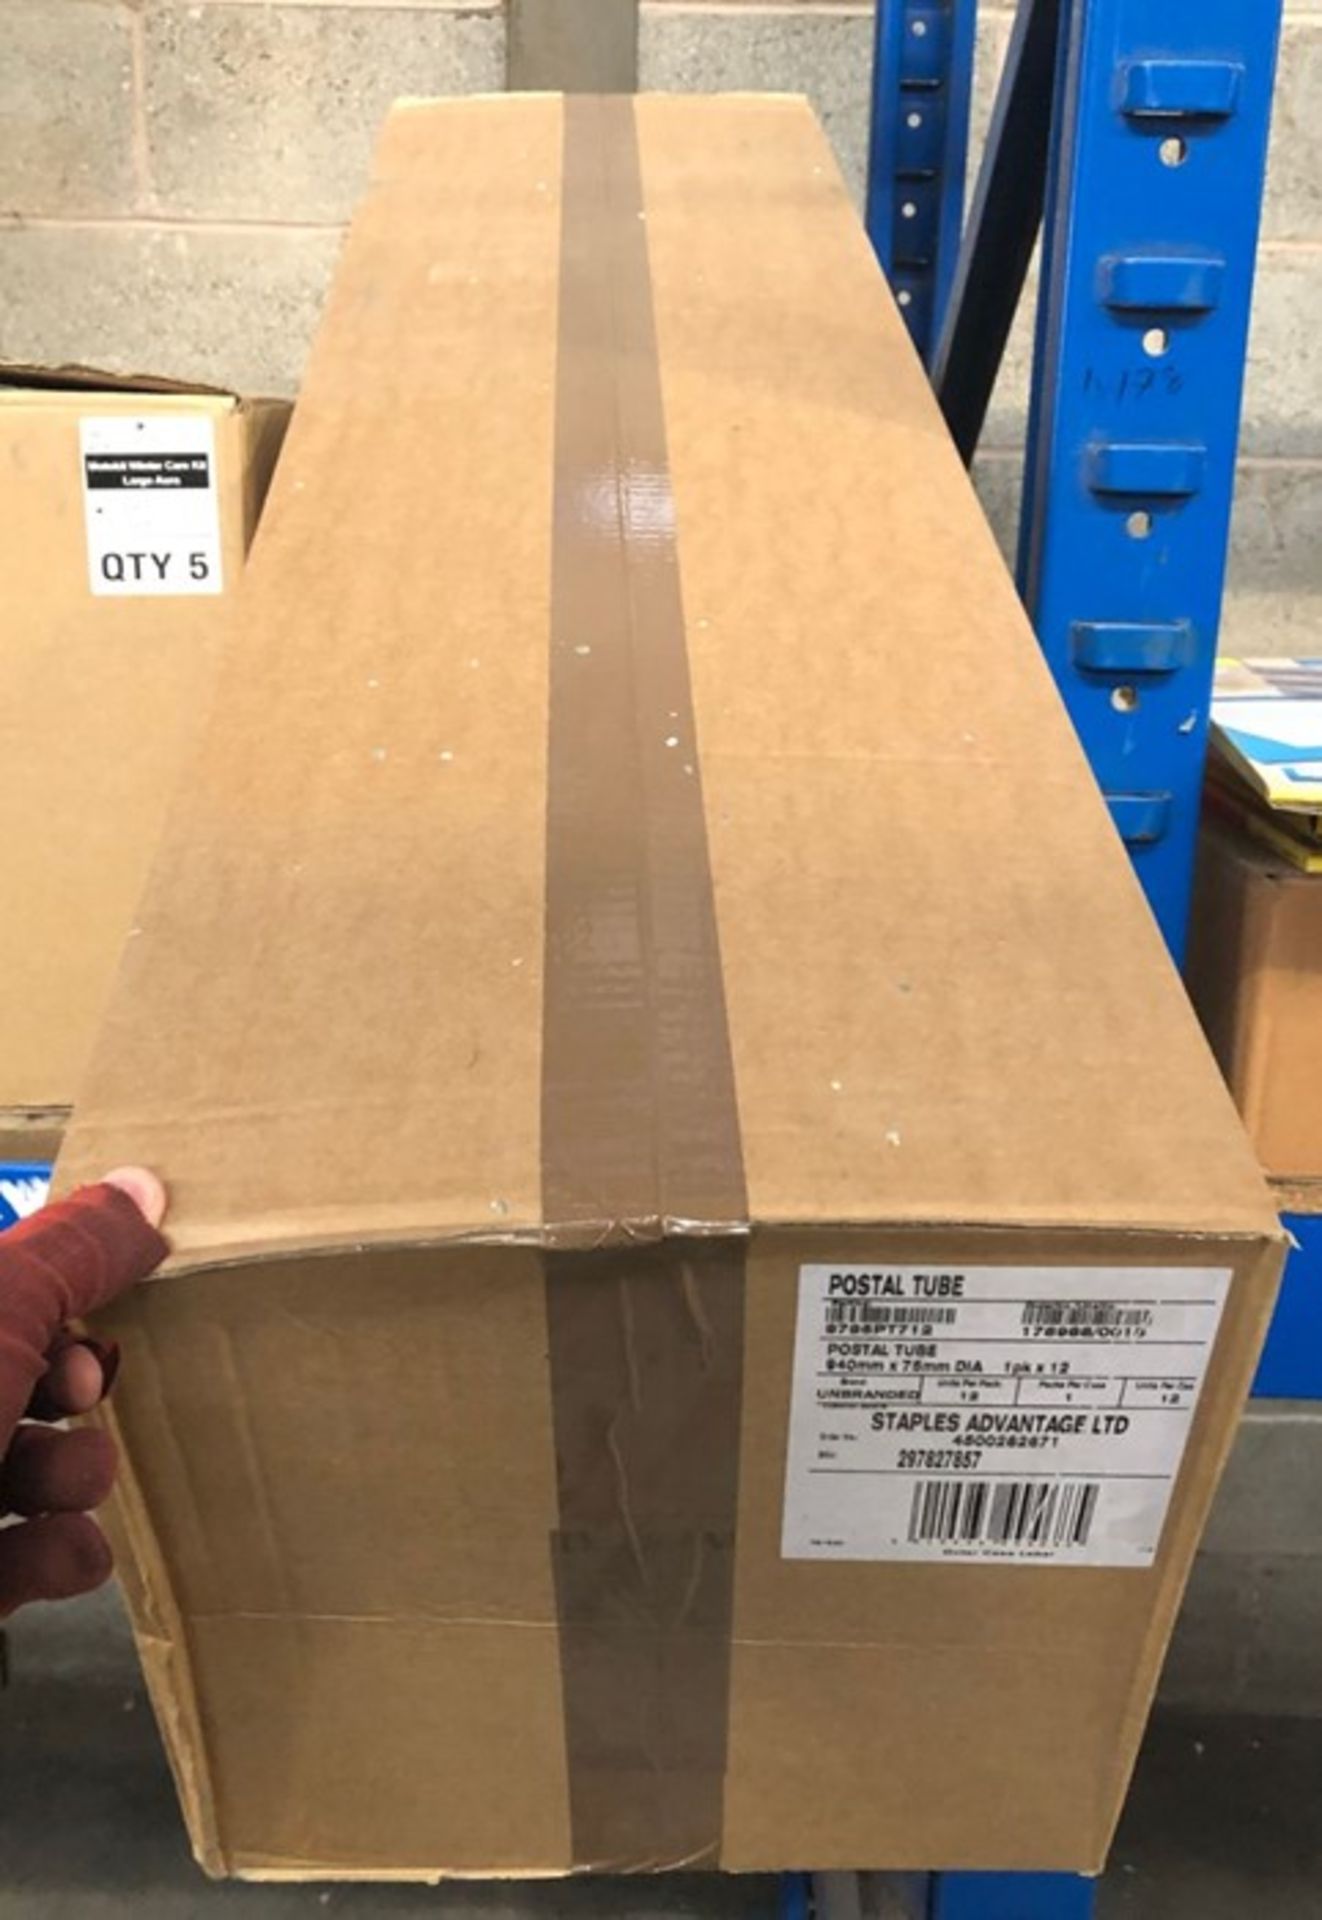 1 X BOX TO CONTAIN VERY LONG POSTAL TUBES